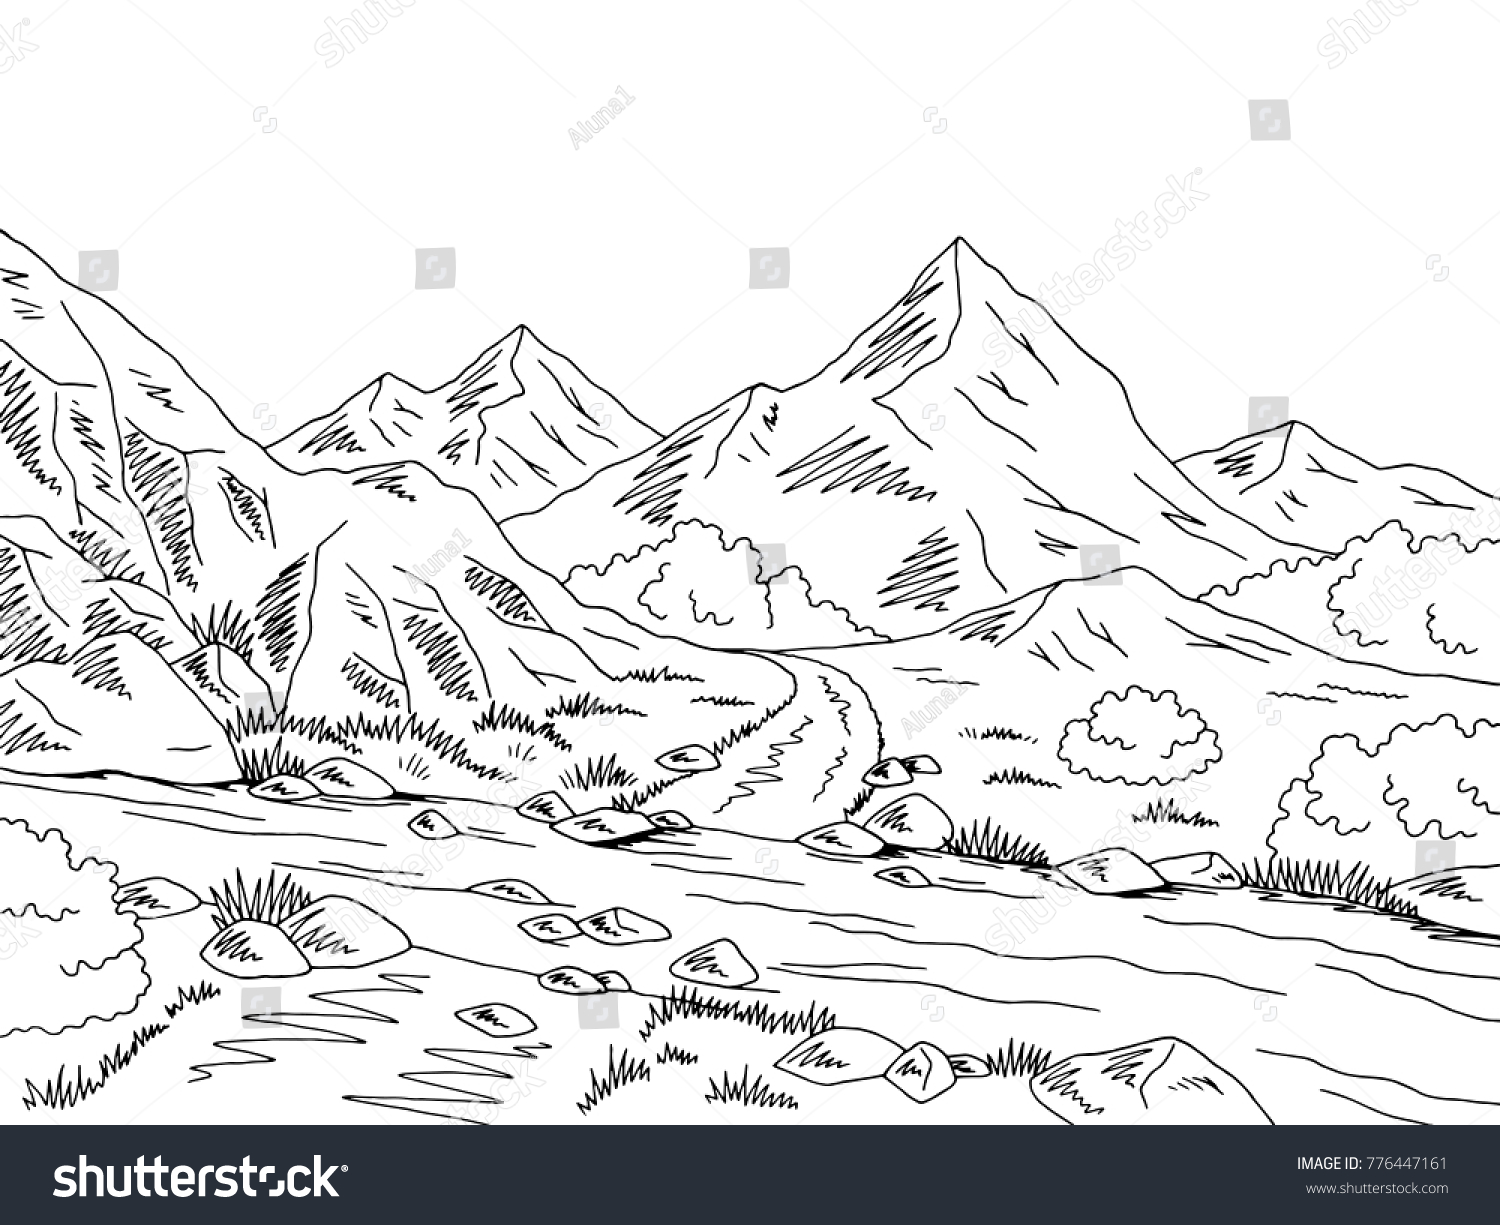 Mountain Road Graphic Black White River Stock Vector (Royalty Free ...